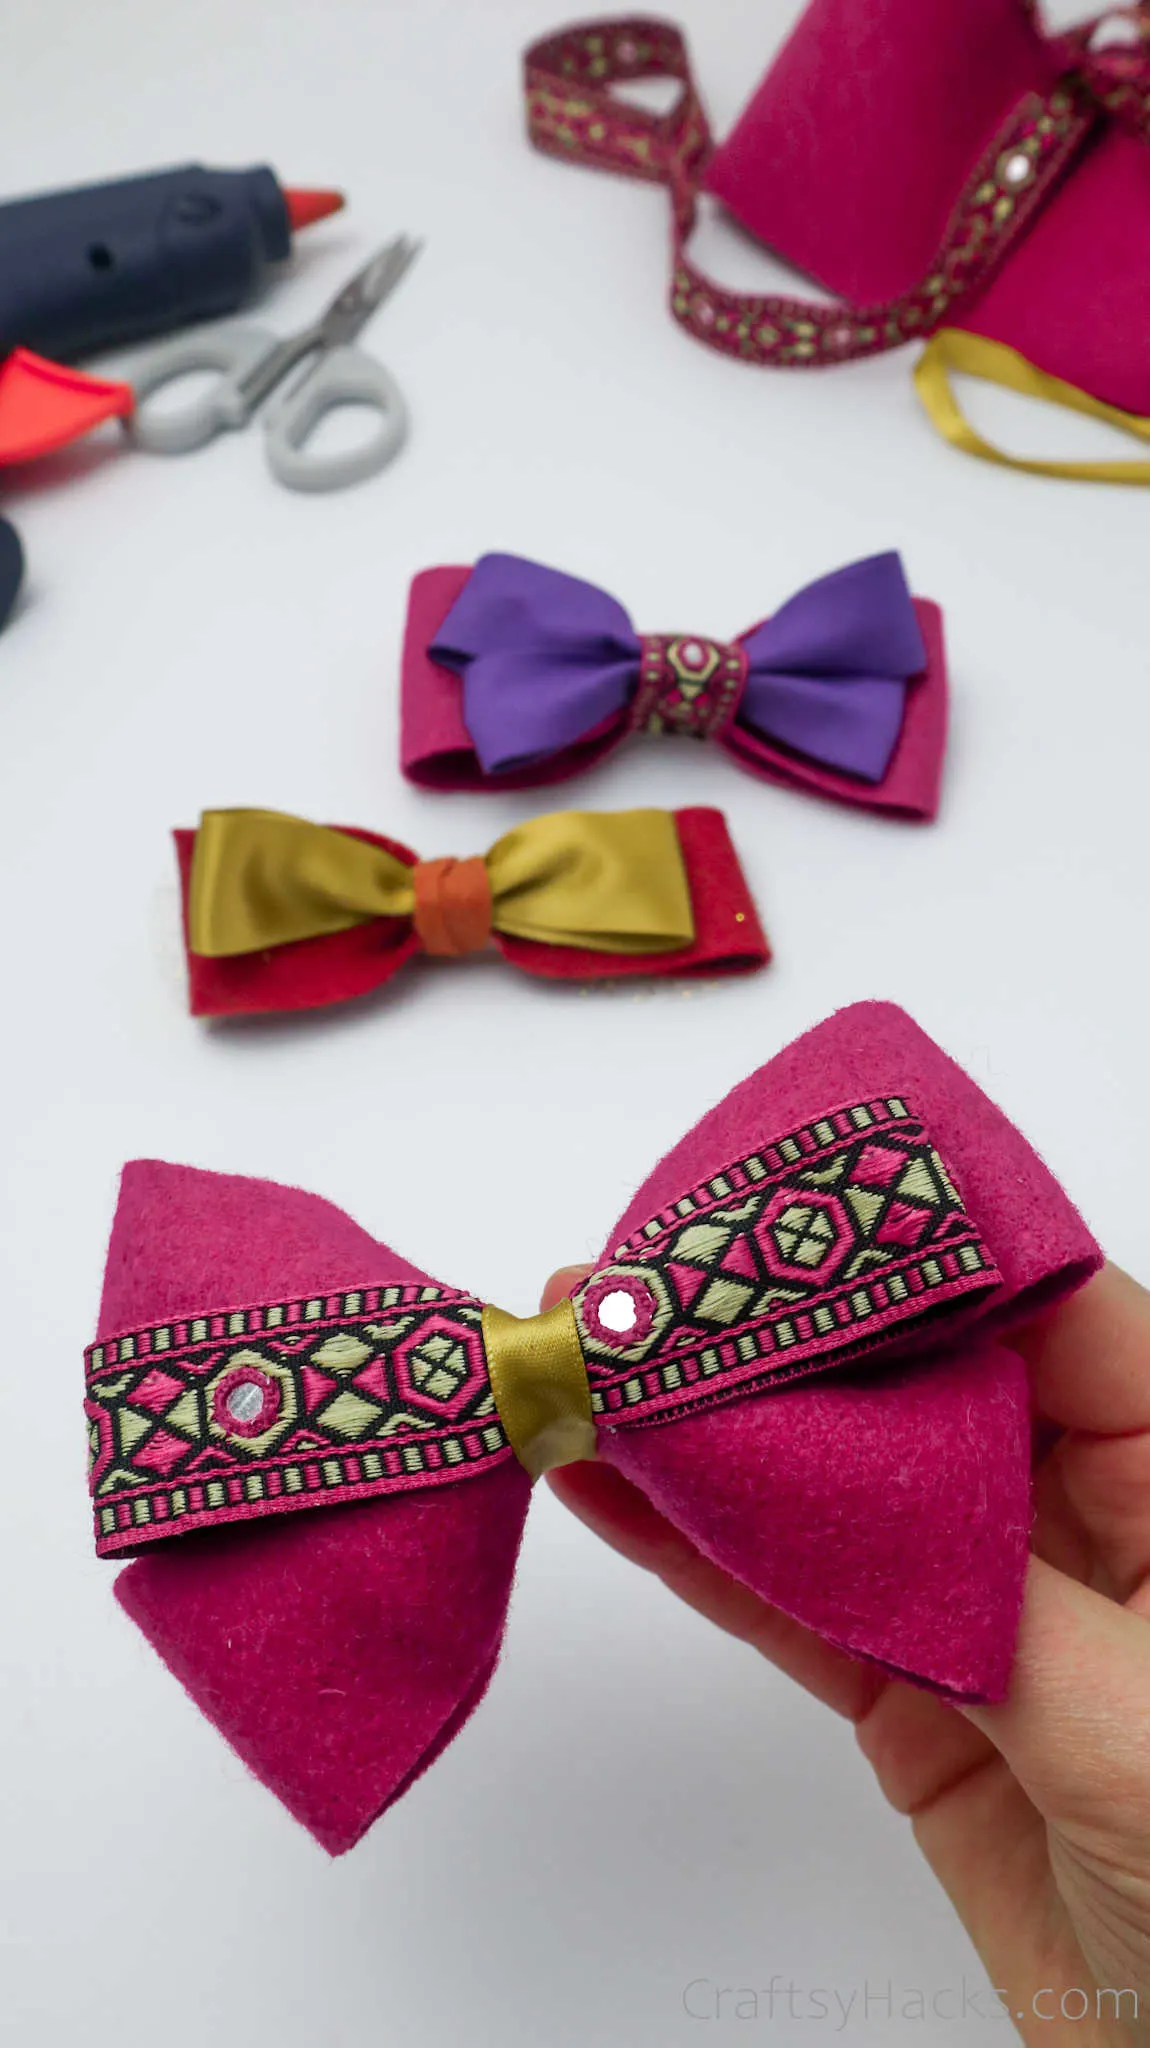 How to Make Hair Bows (Step-by-Step Tutorial) - Craftsy Hacks